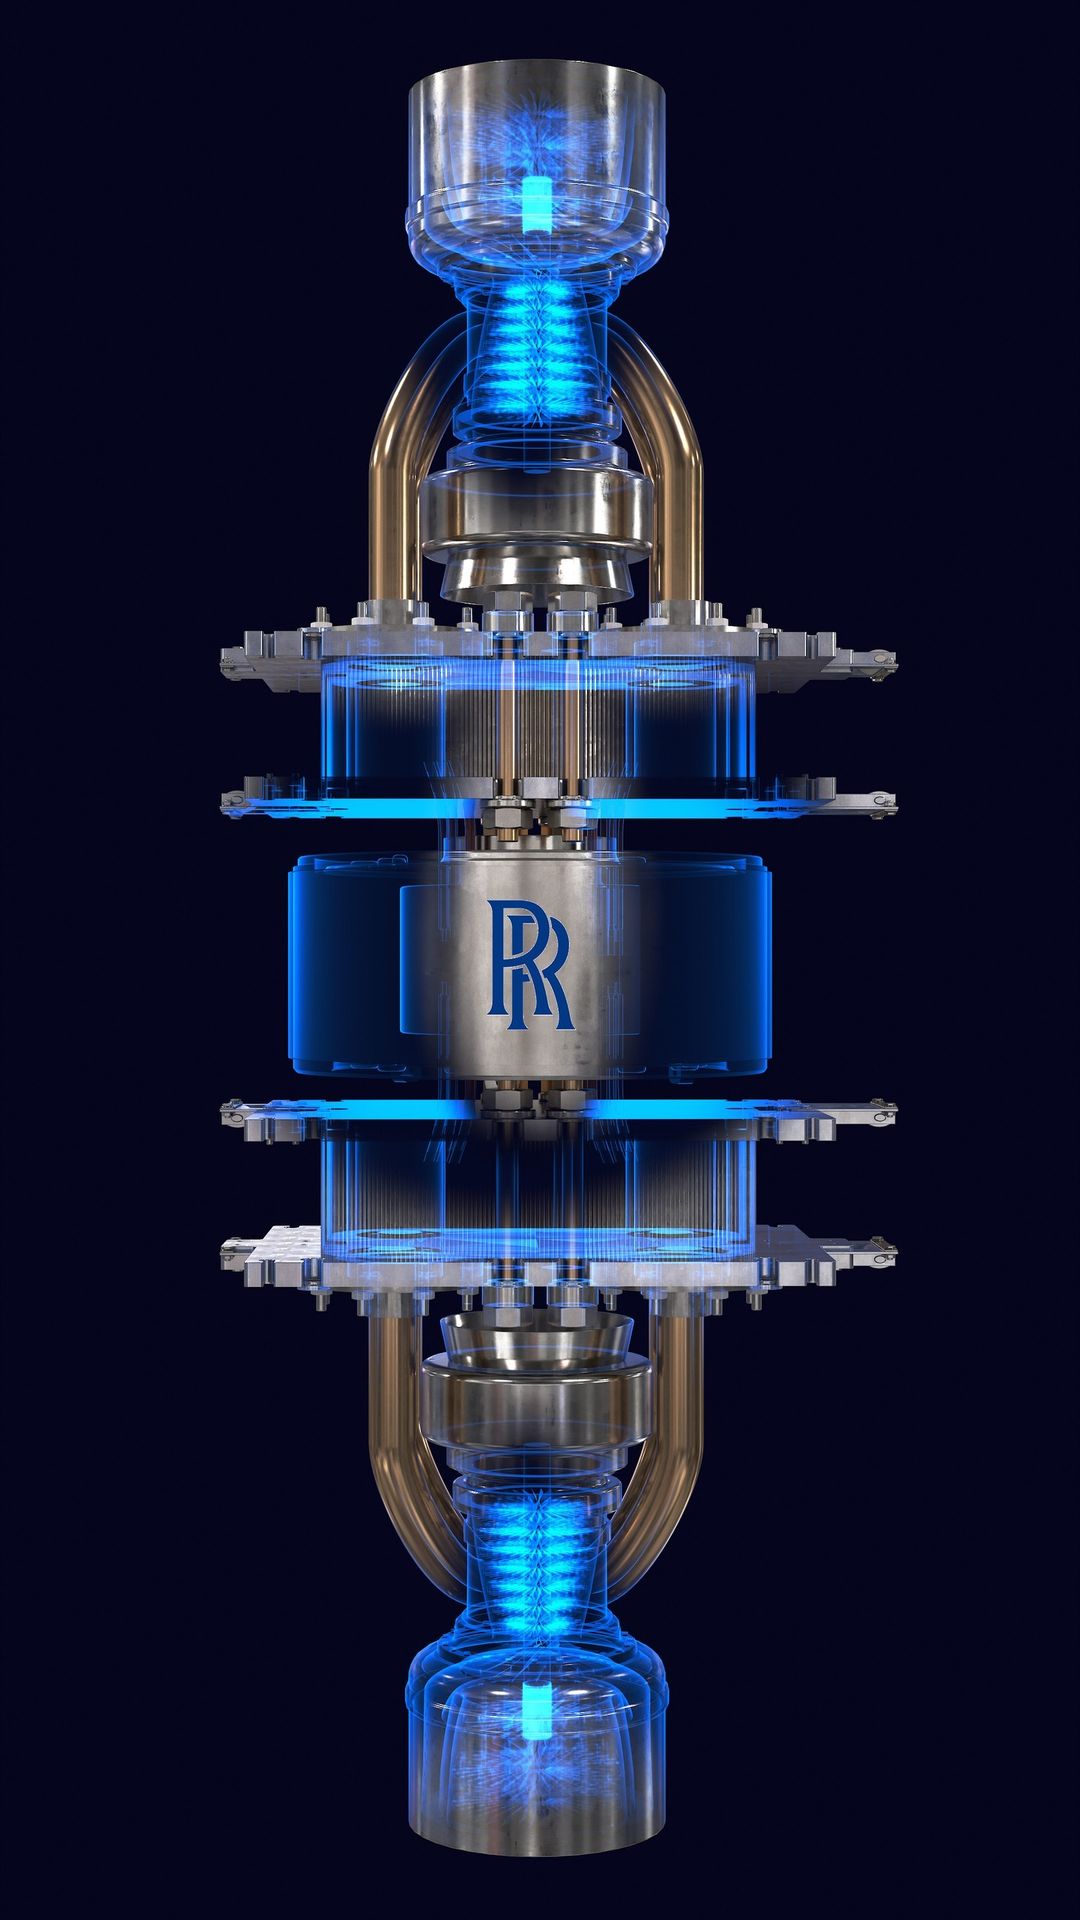 model of the Rolls Royce micro nuclear reactor